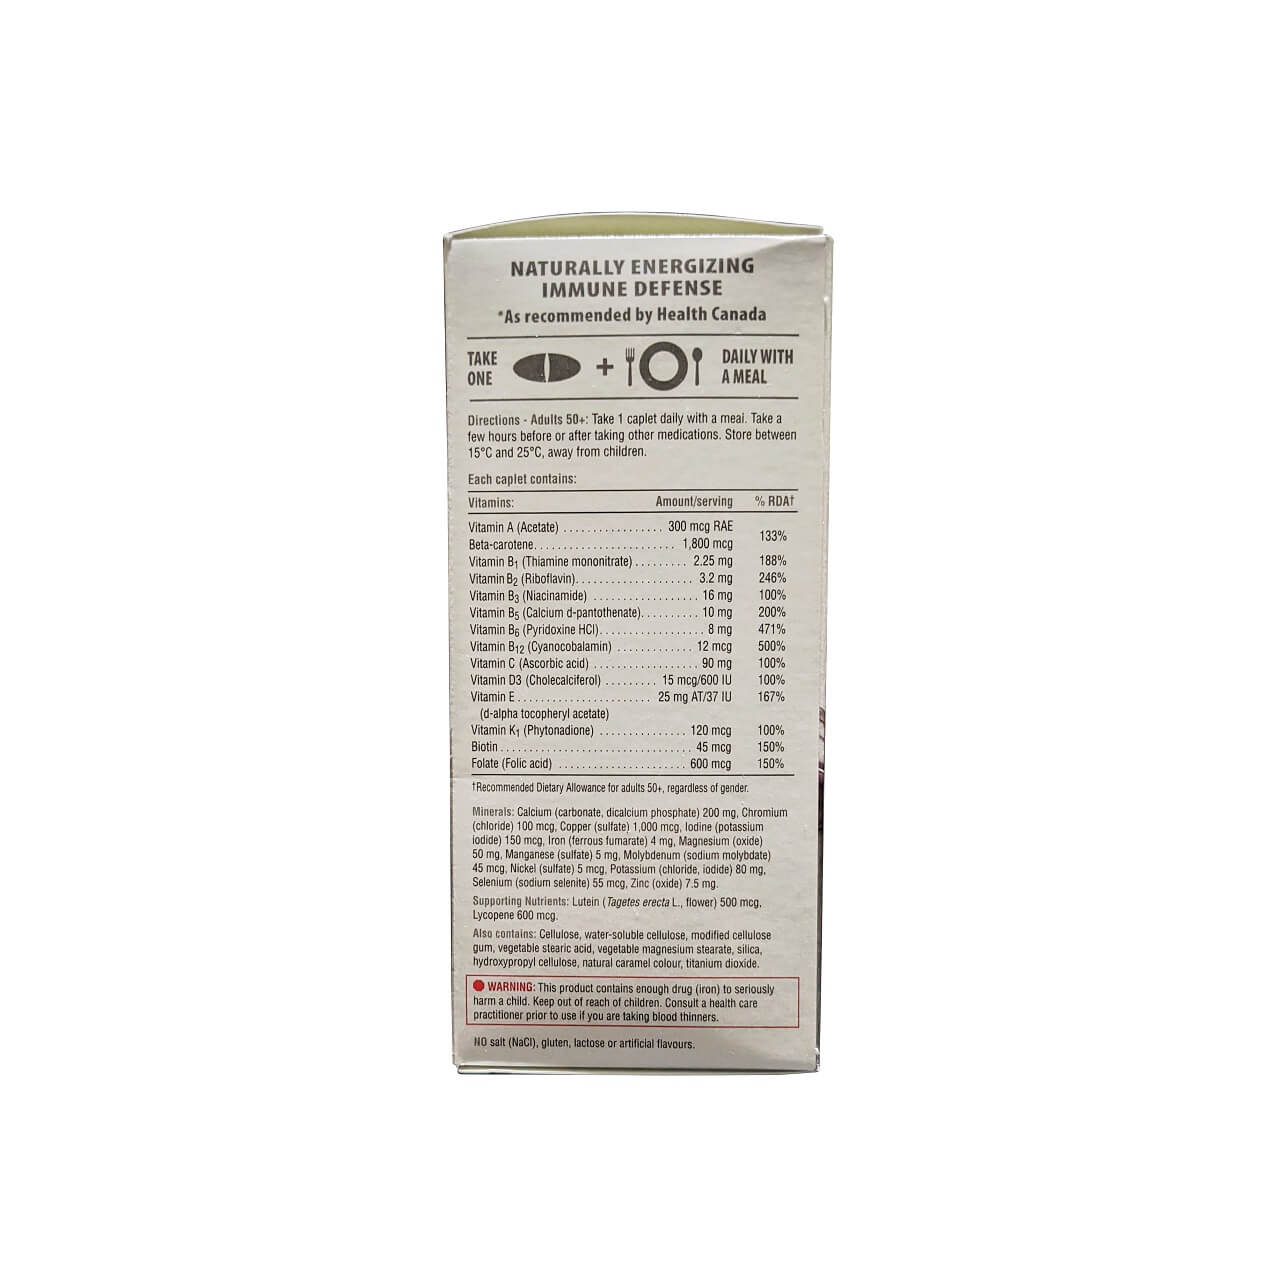 Directions, ingredients, and warnings for Jamieson Multi 100% Complete Vitamin for Adults 50+ (90 caplets) in English